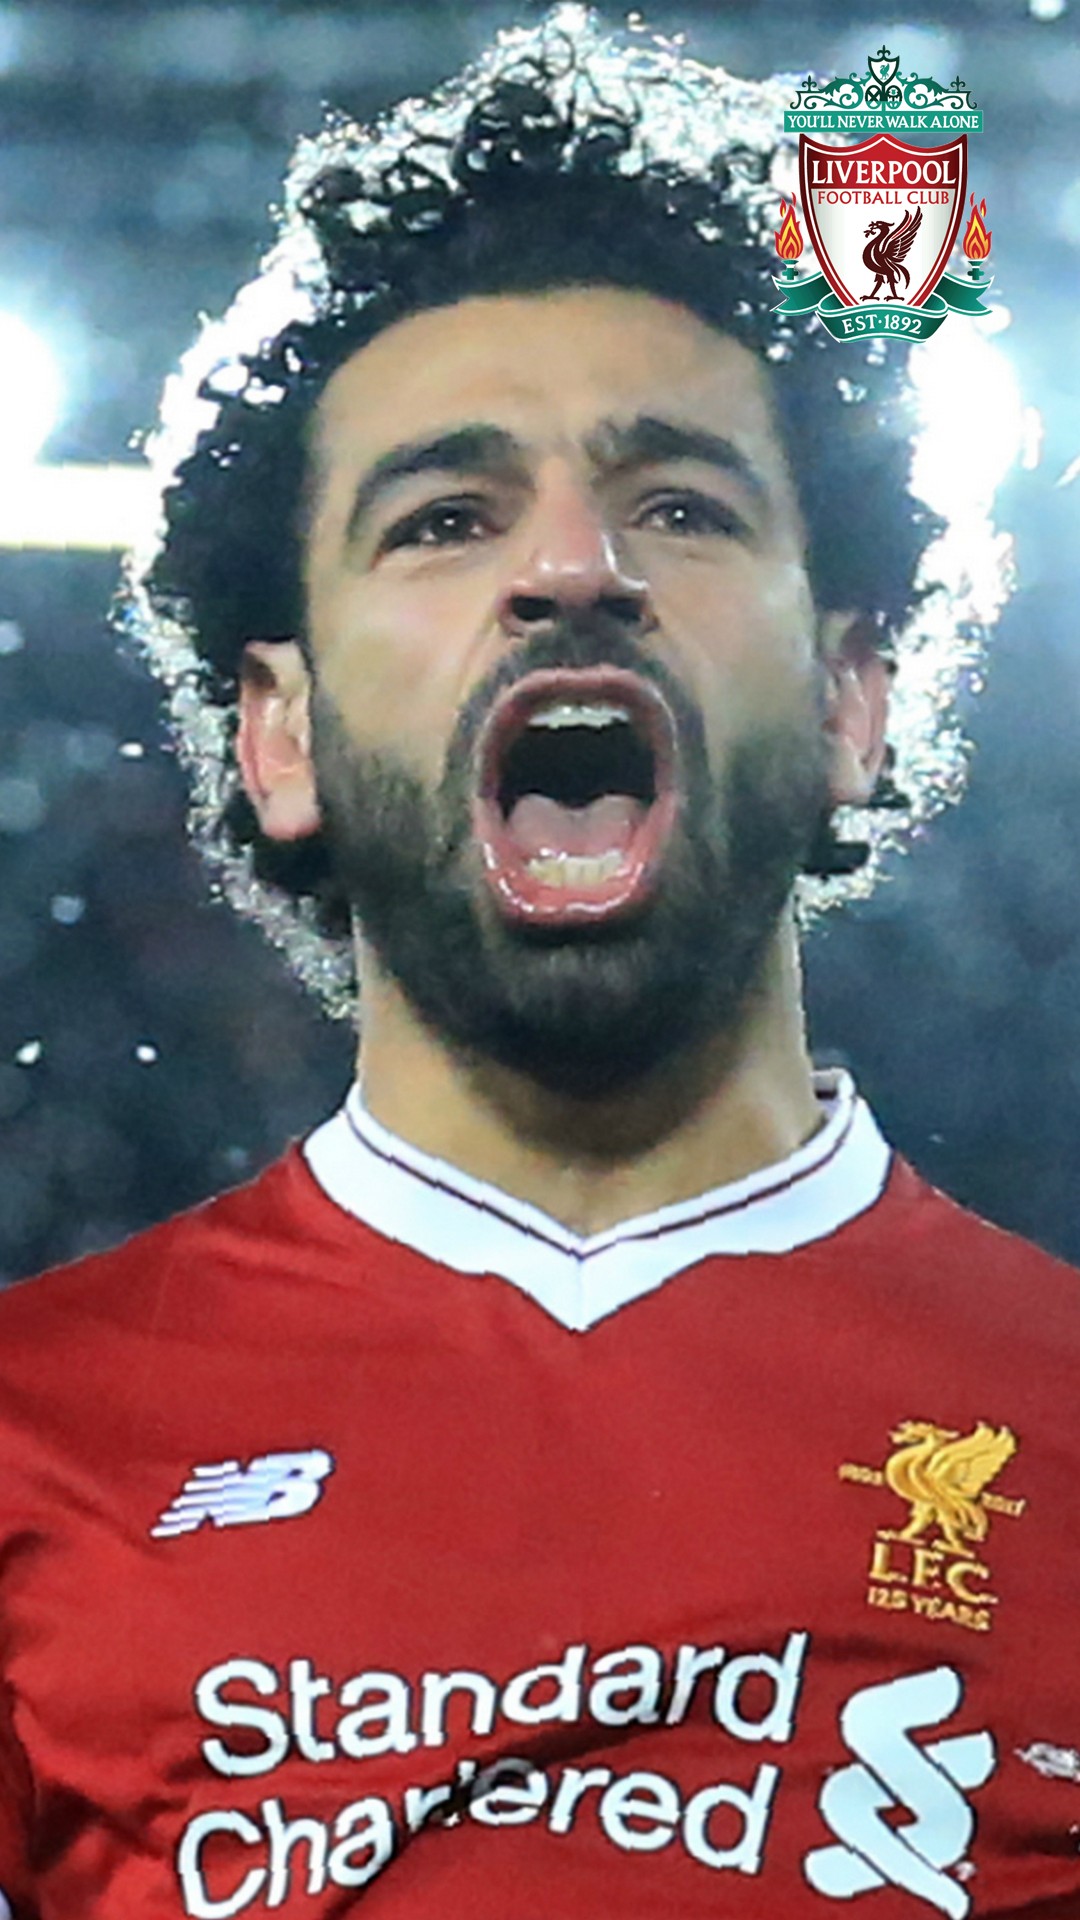 Mohamed Salah Pictures Wallpaper For Android with image resolution 1080x1920 pixel. You can make this wallpaper for your Android backgrounds, Tablet, Smartphones Screensavers and Mobile Phone Lock Screen